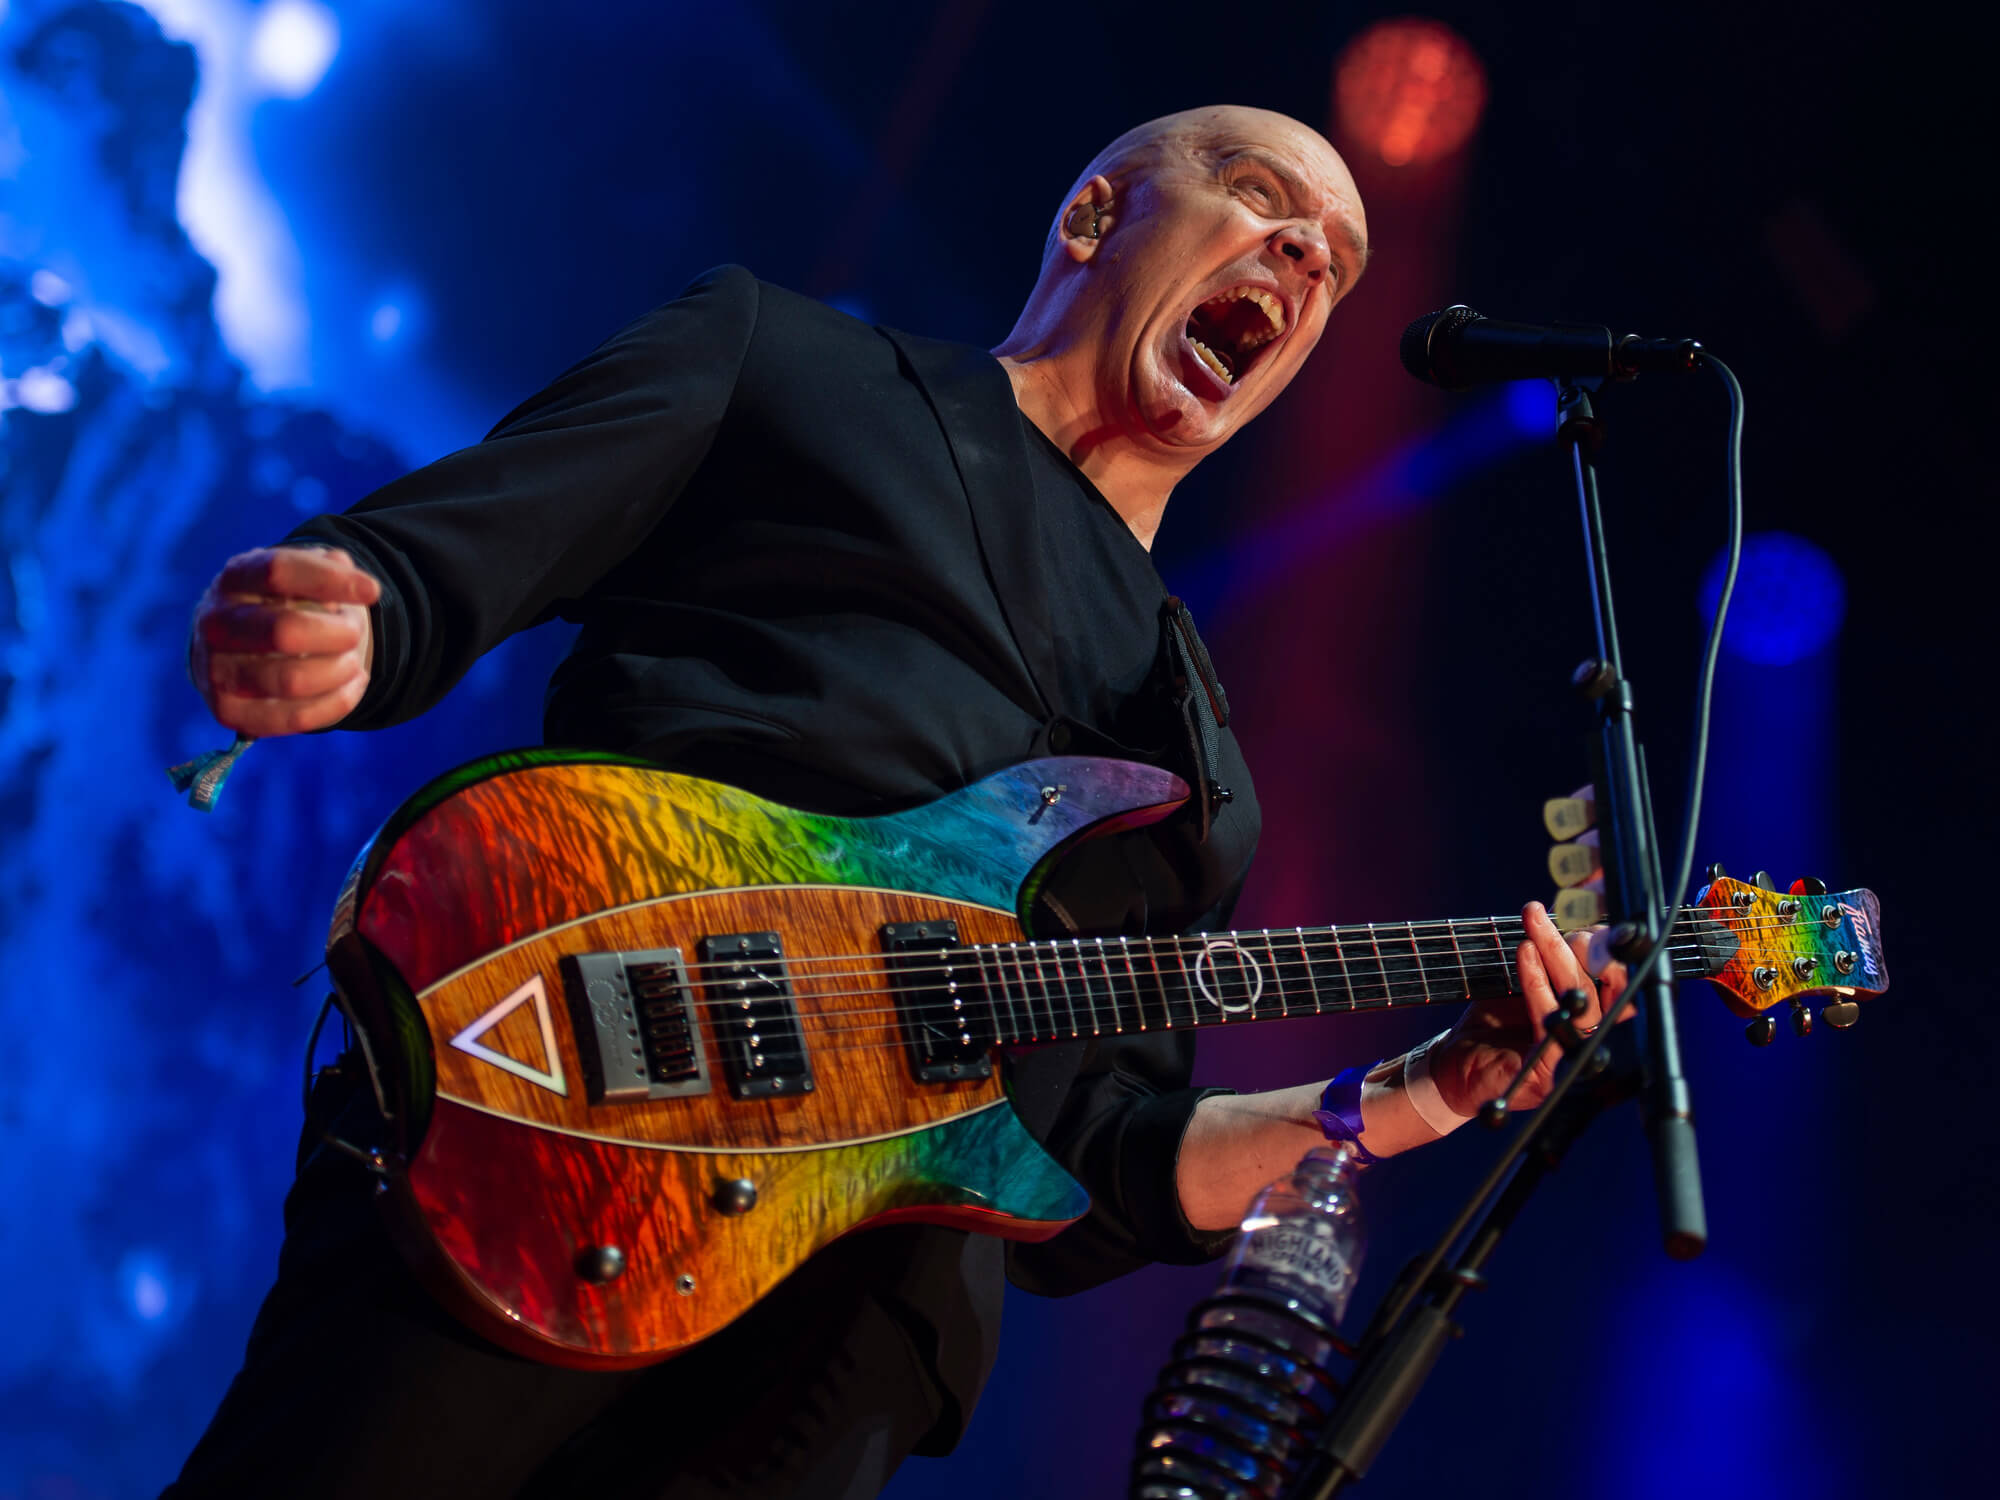 Devin Townsend Performing